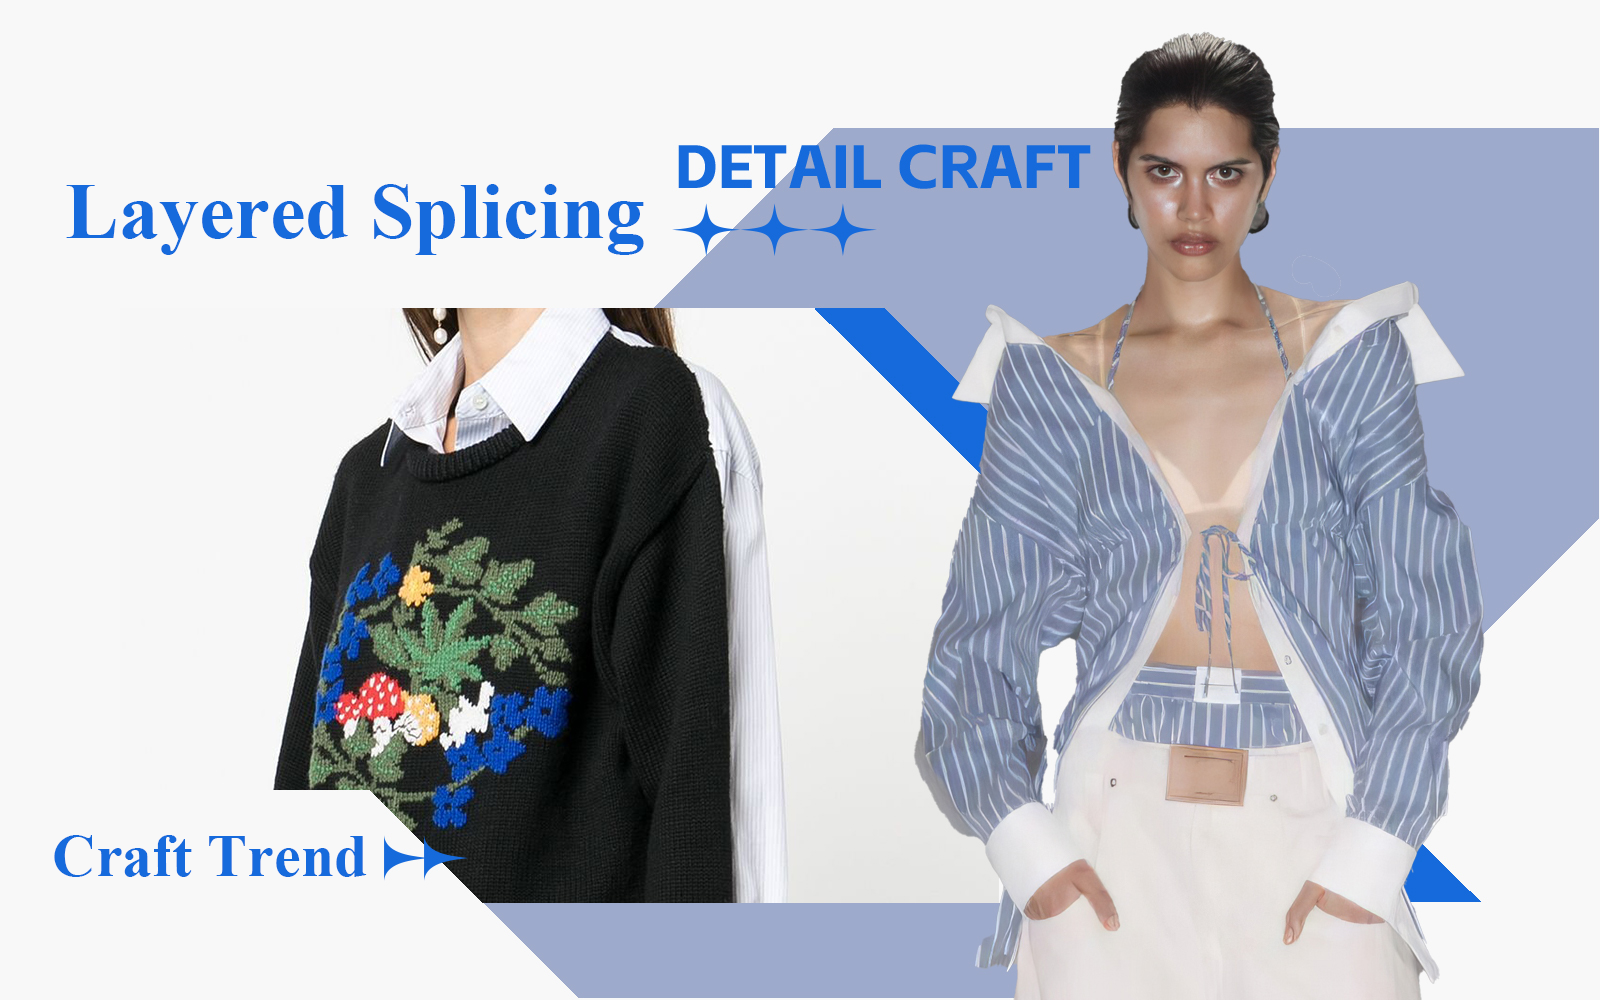 Layered Splicing -- The Craft Trend for Womenswear